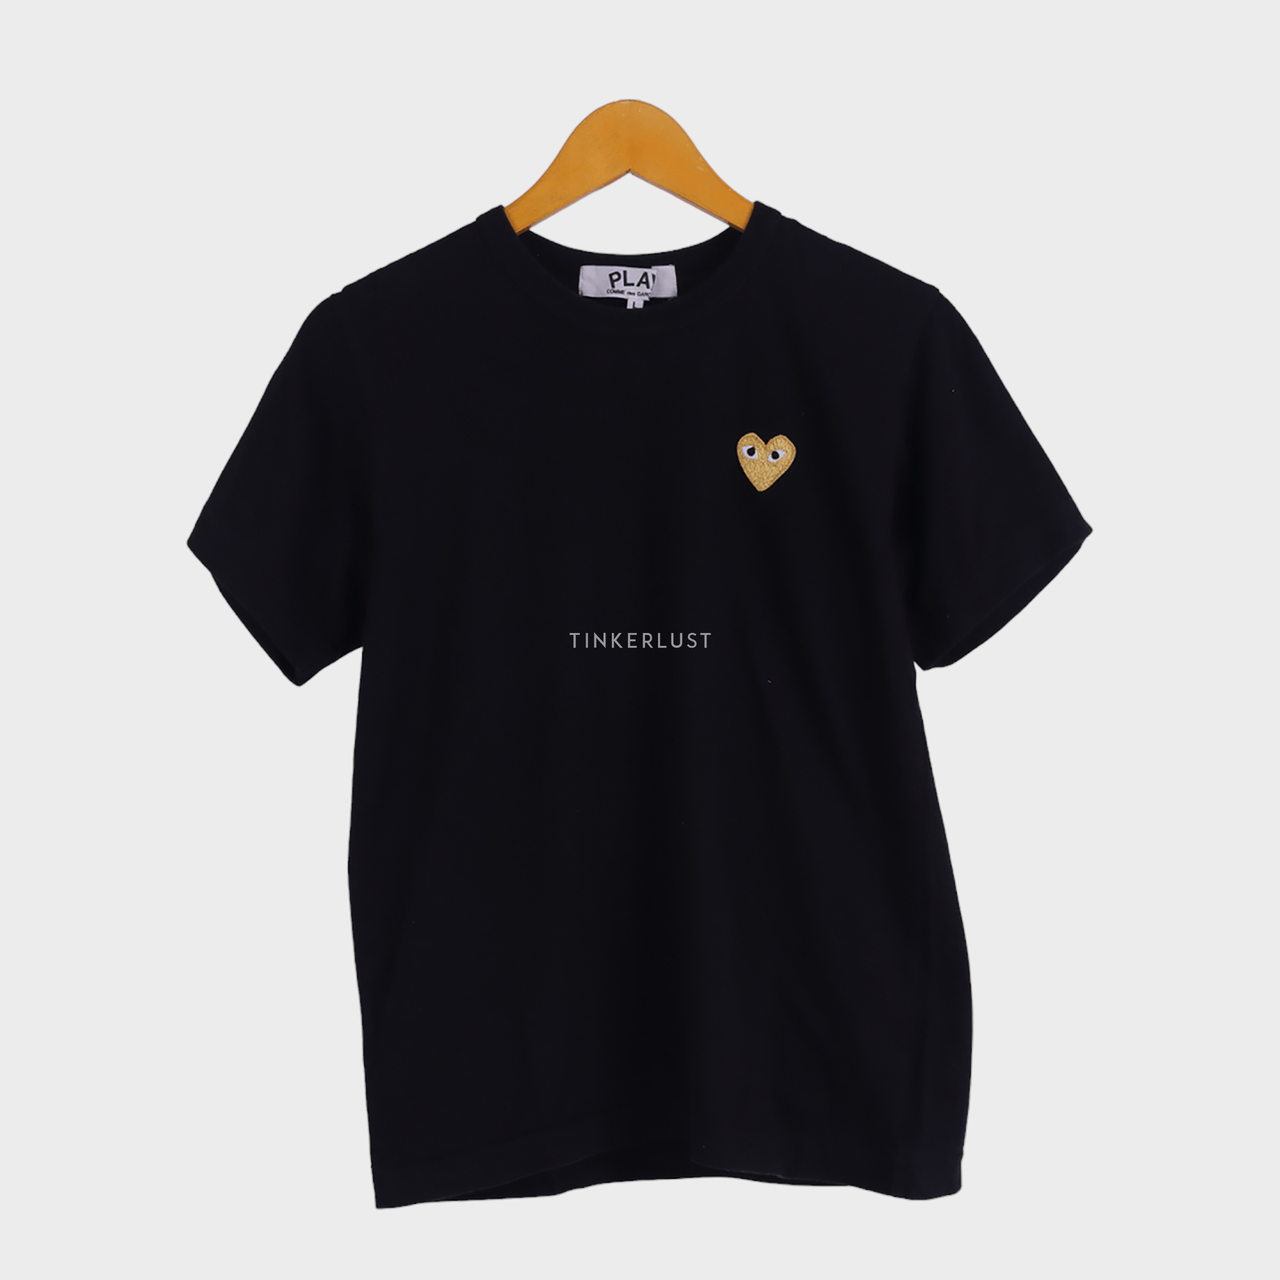 Play Comme des Garcons Gold Heart Black Tshirt 